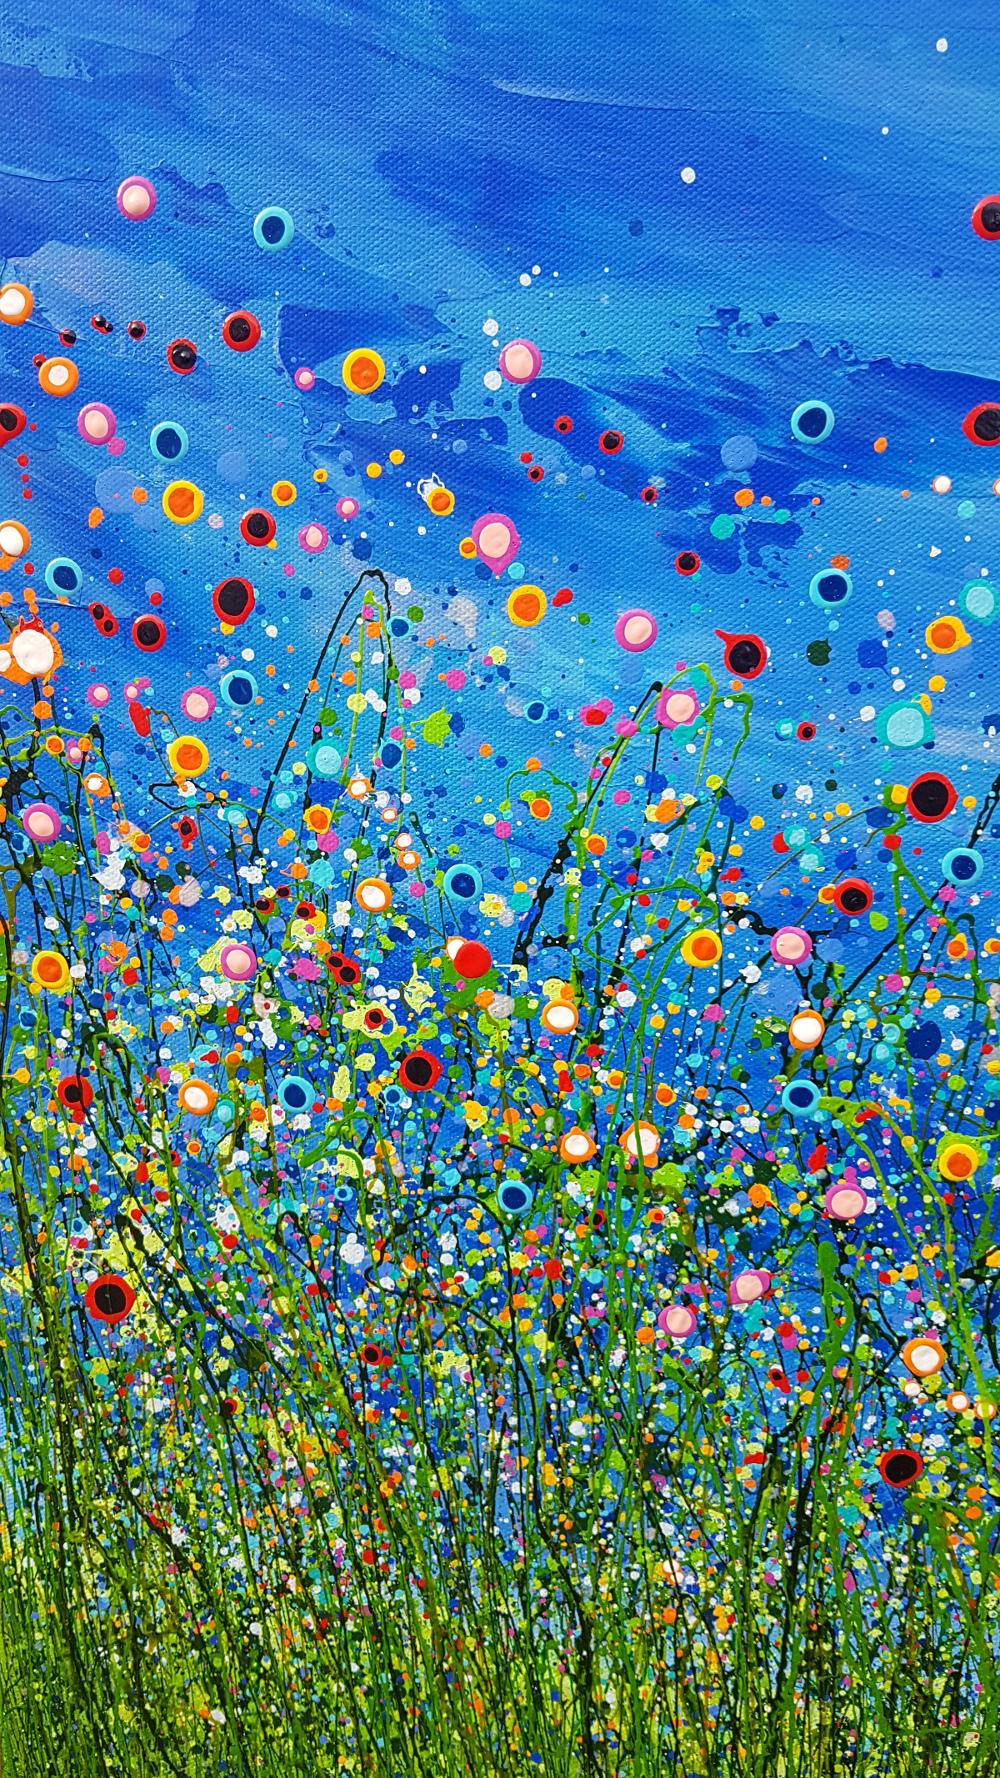 Summer Luminescence – By Lucy Moore [2022]

original
Acrylic on canvas
Image size: H:60 cm x W:60 cm
Complete Size of Unframed Work: H:60 cm x W:60 cm x D:1.5cm
Sold Unframed
Please note that insitu images are purely an indication of how a piece may